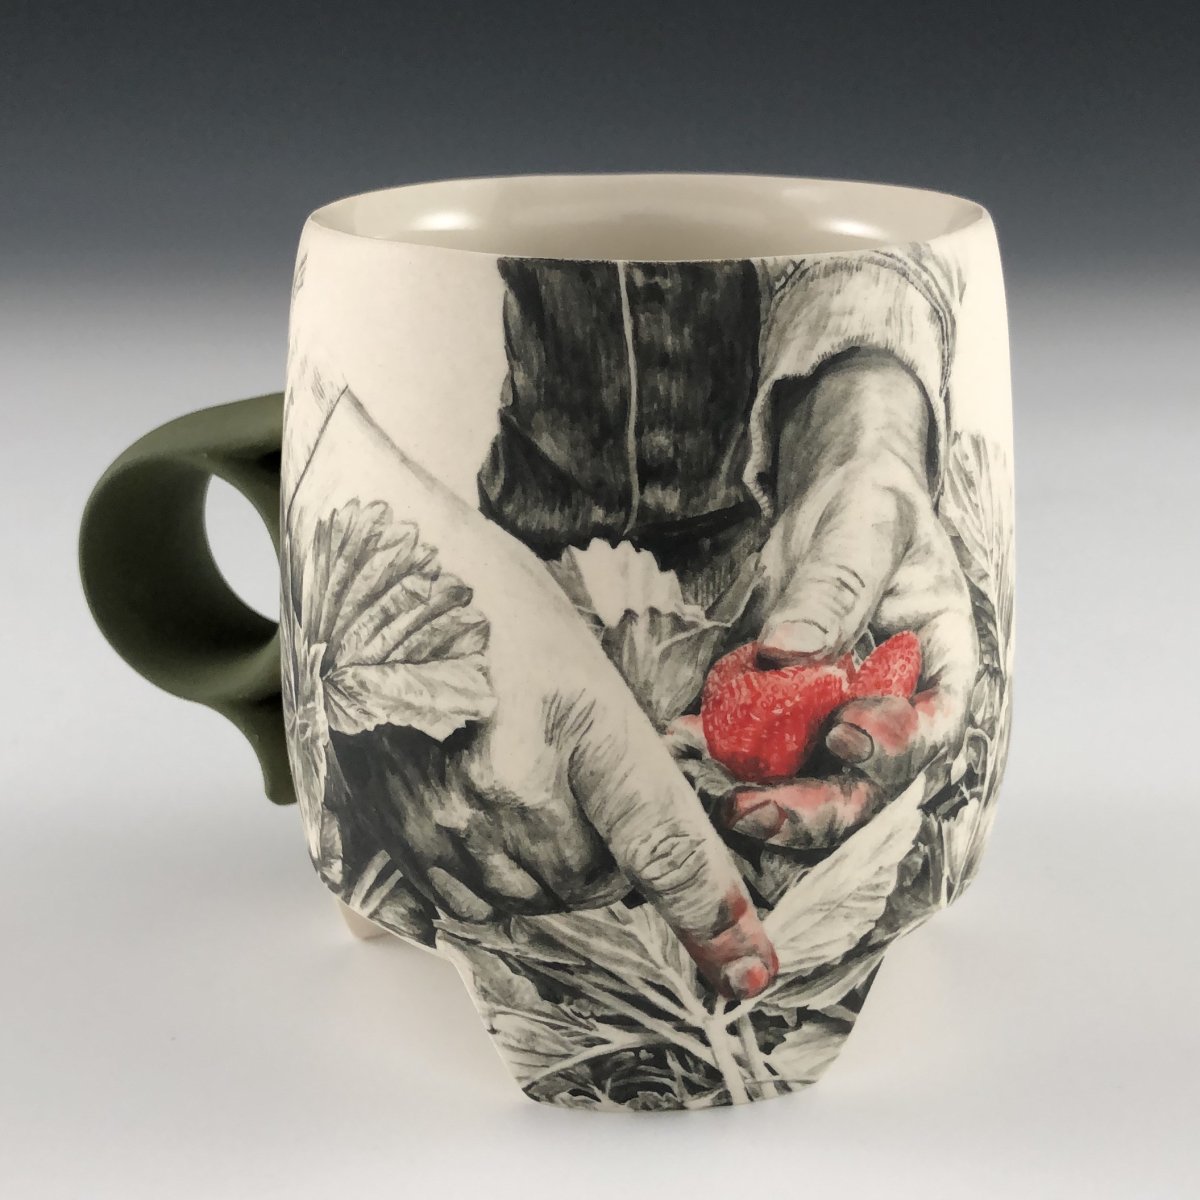 Hand-painted porcelain mug with hands holding a strawberry.